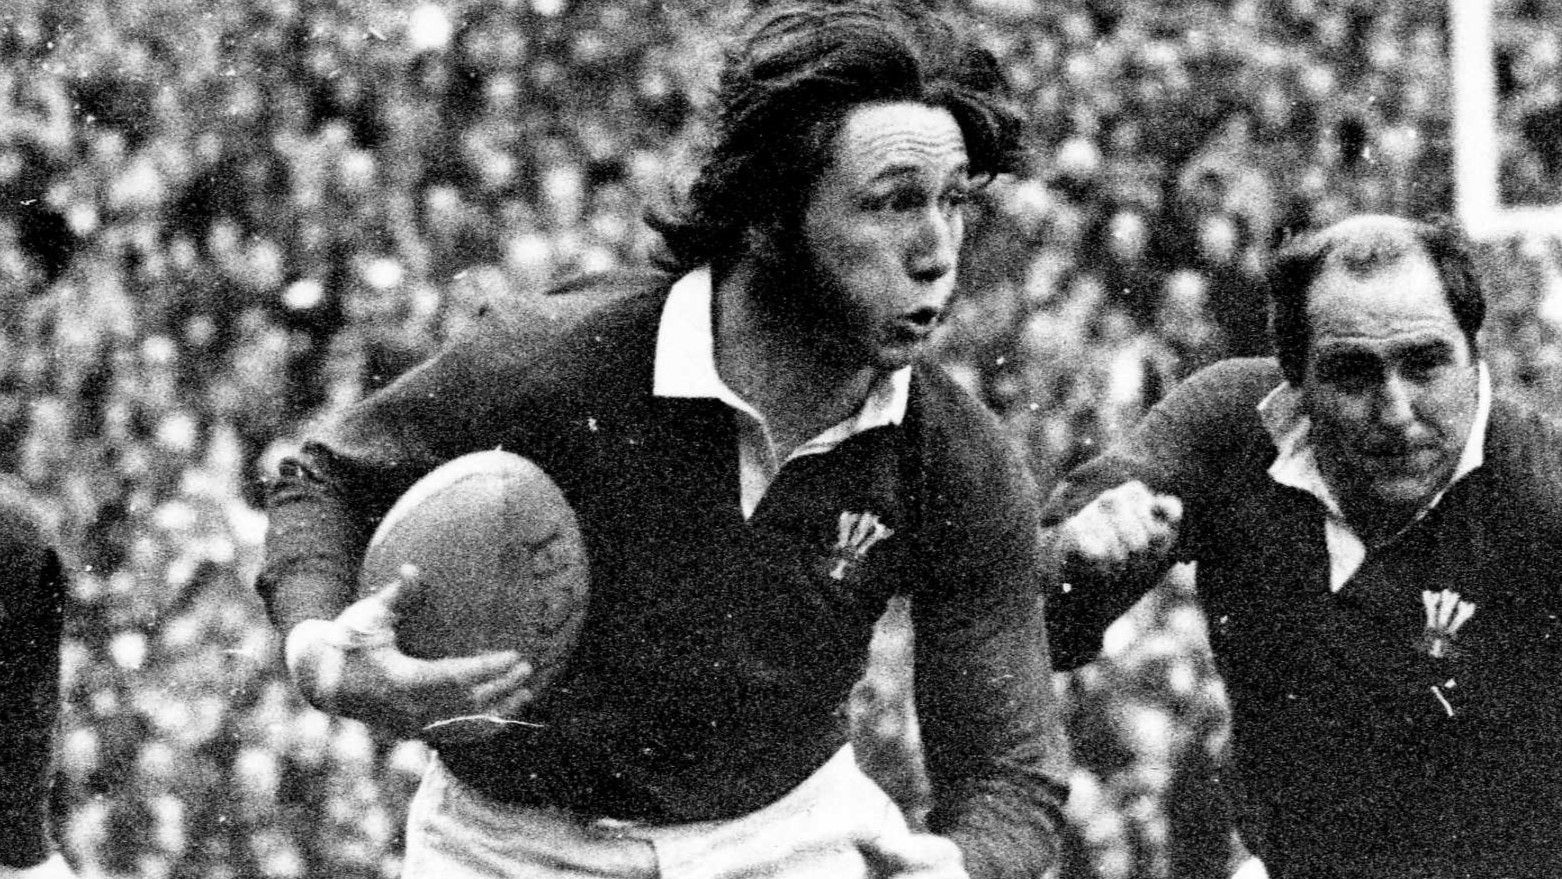 JPR Williams played for Wales as well as the British &amp; Irish Lions.